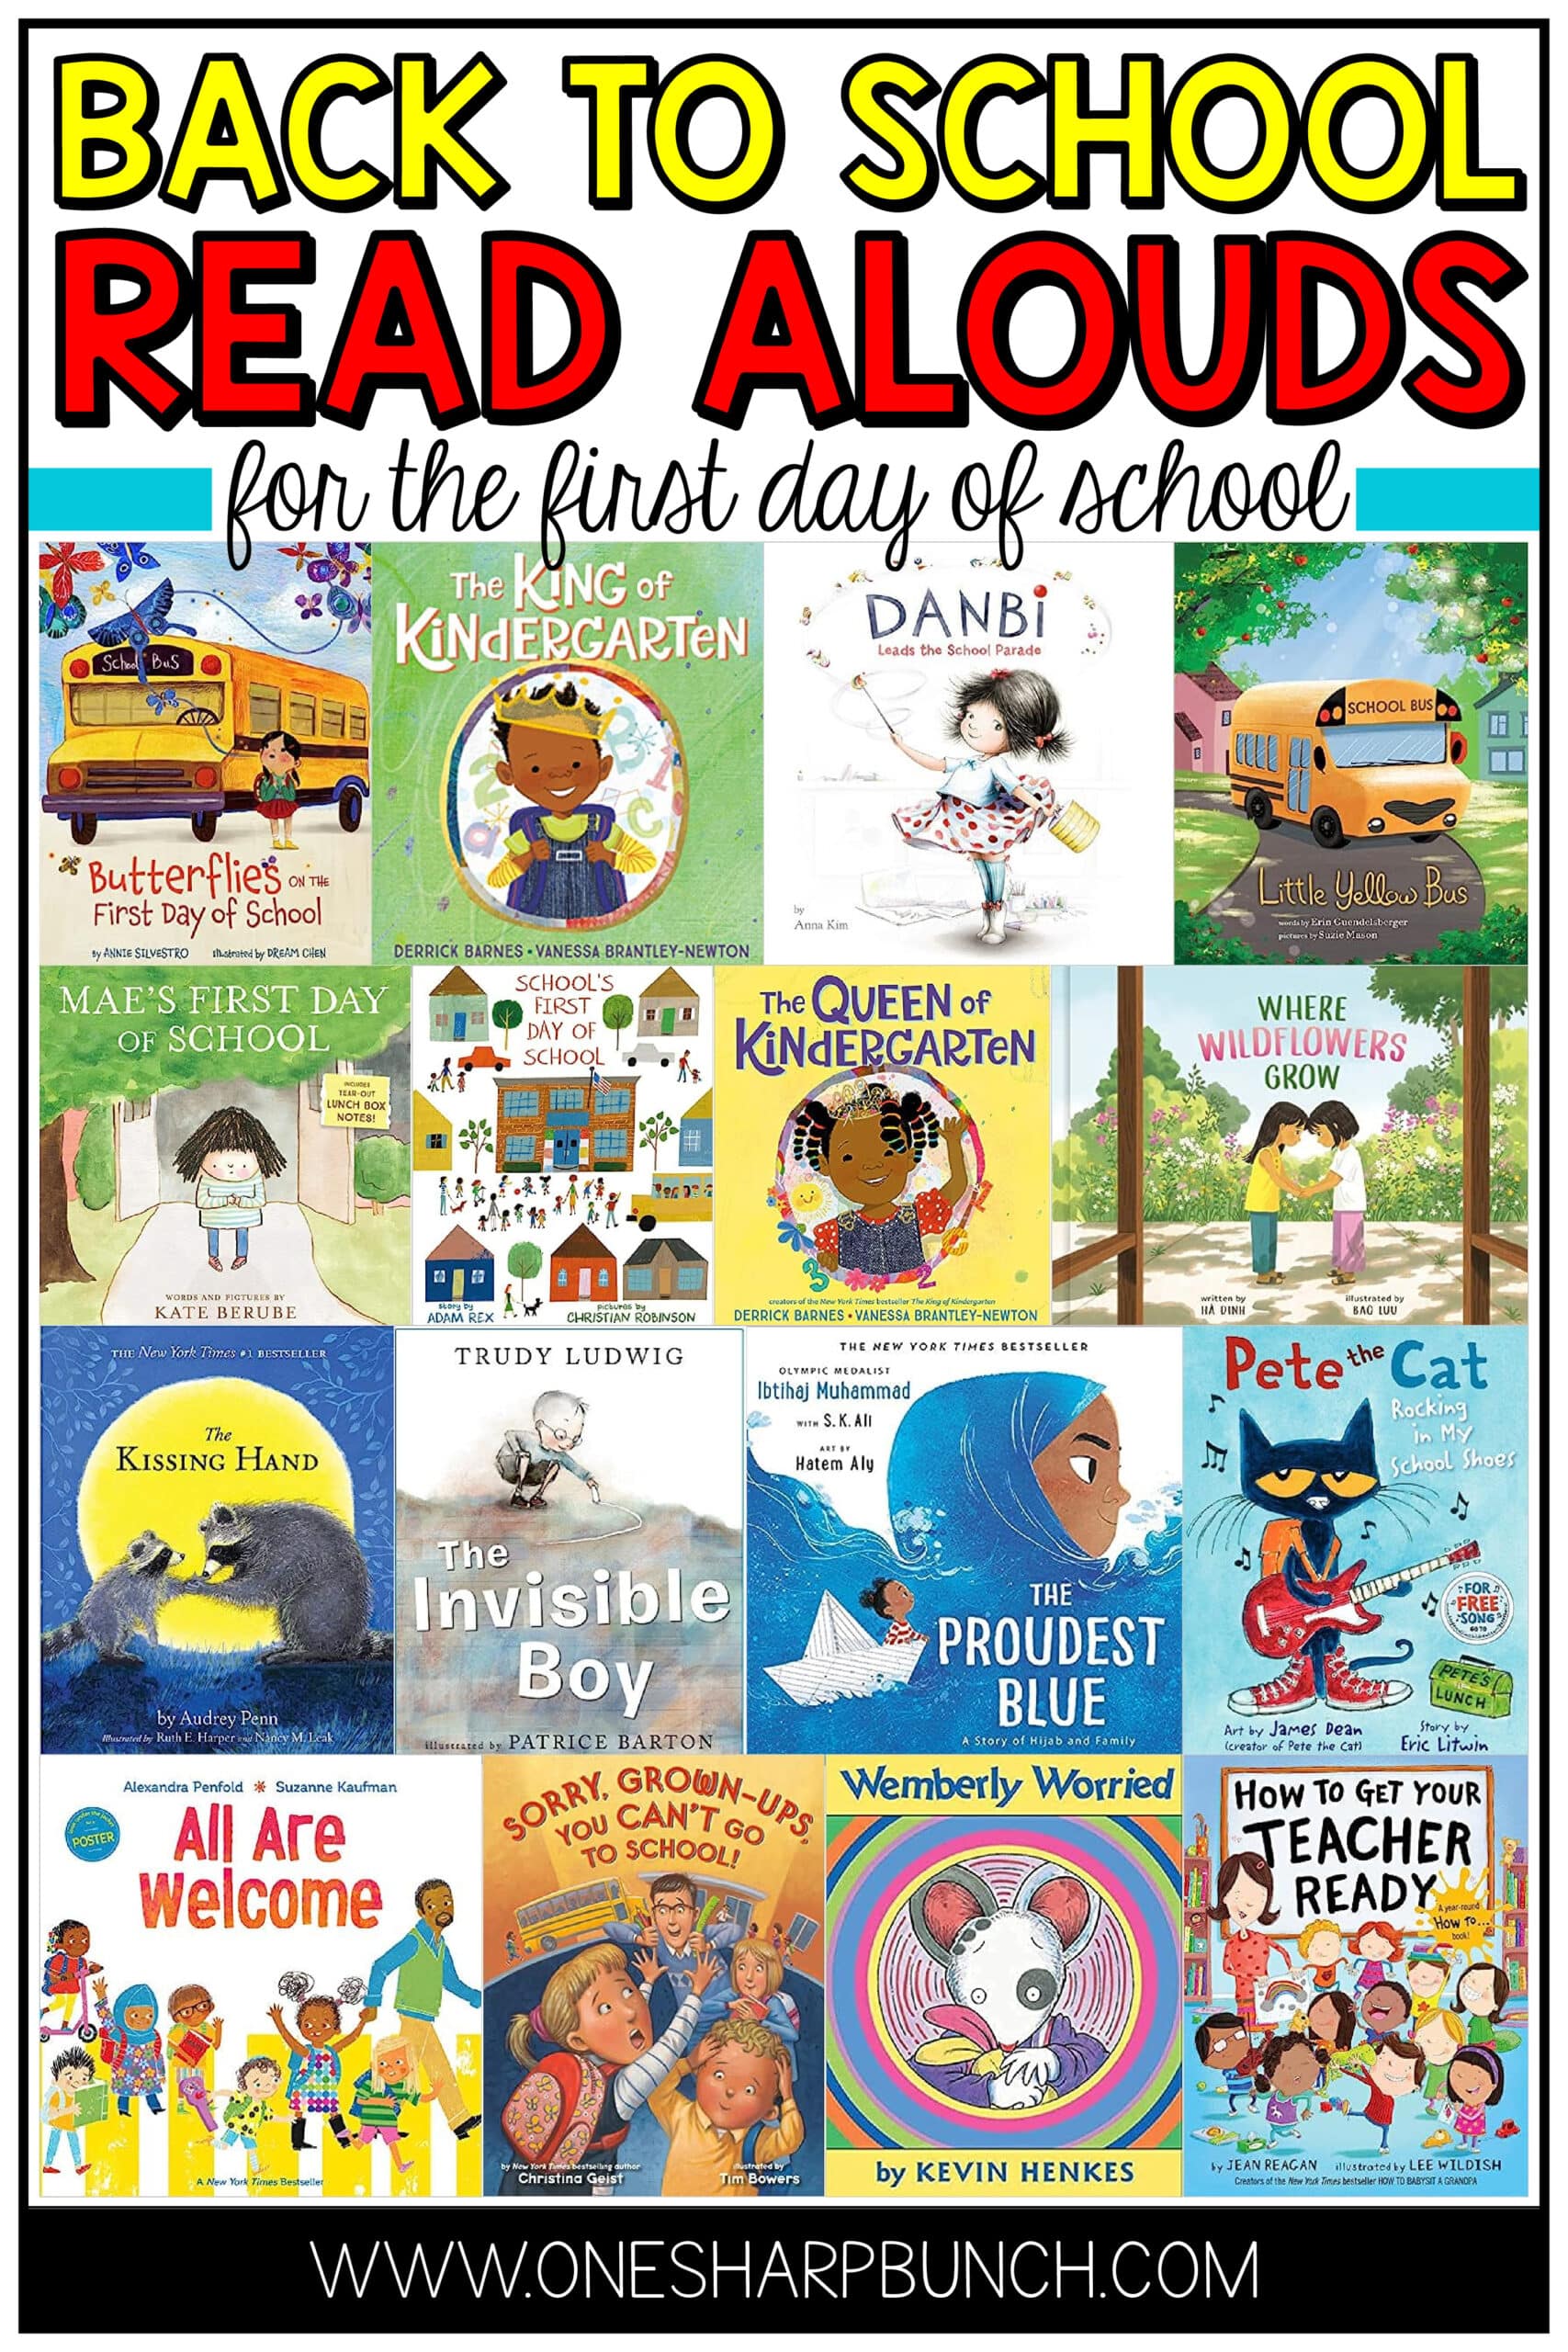 Back to school books are a great way to calm your students first day jitters. Today, I am sharing over 40 back to school read alouds for kids that will help them adjust to their new classroom and get excited about the school year. These back to school books for preschool, kindergarten, and first grade pair great with first week lesson plans, back to school crafts, and more. Find back to school activities and more in this list of back to school read alouds.